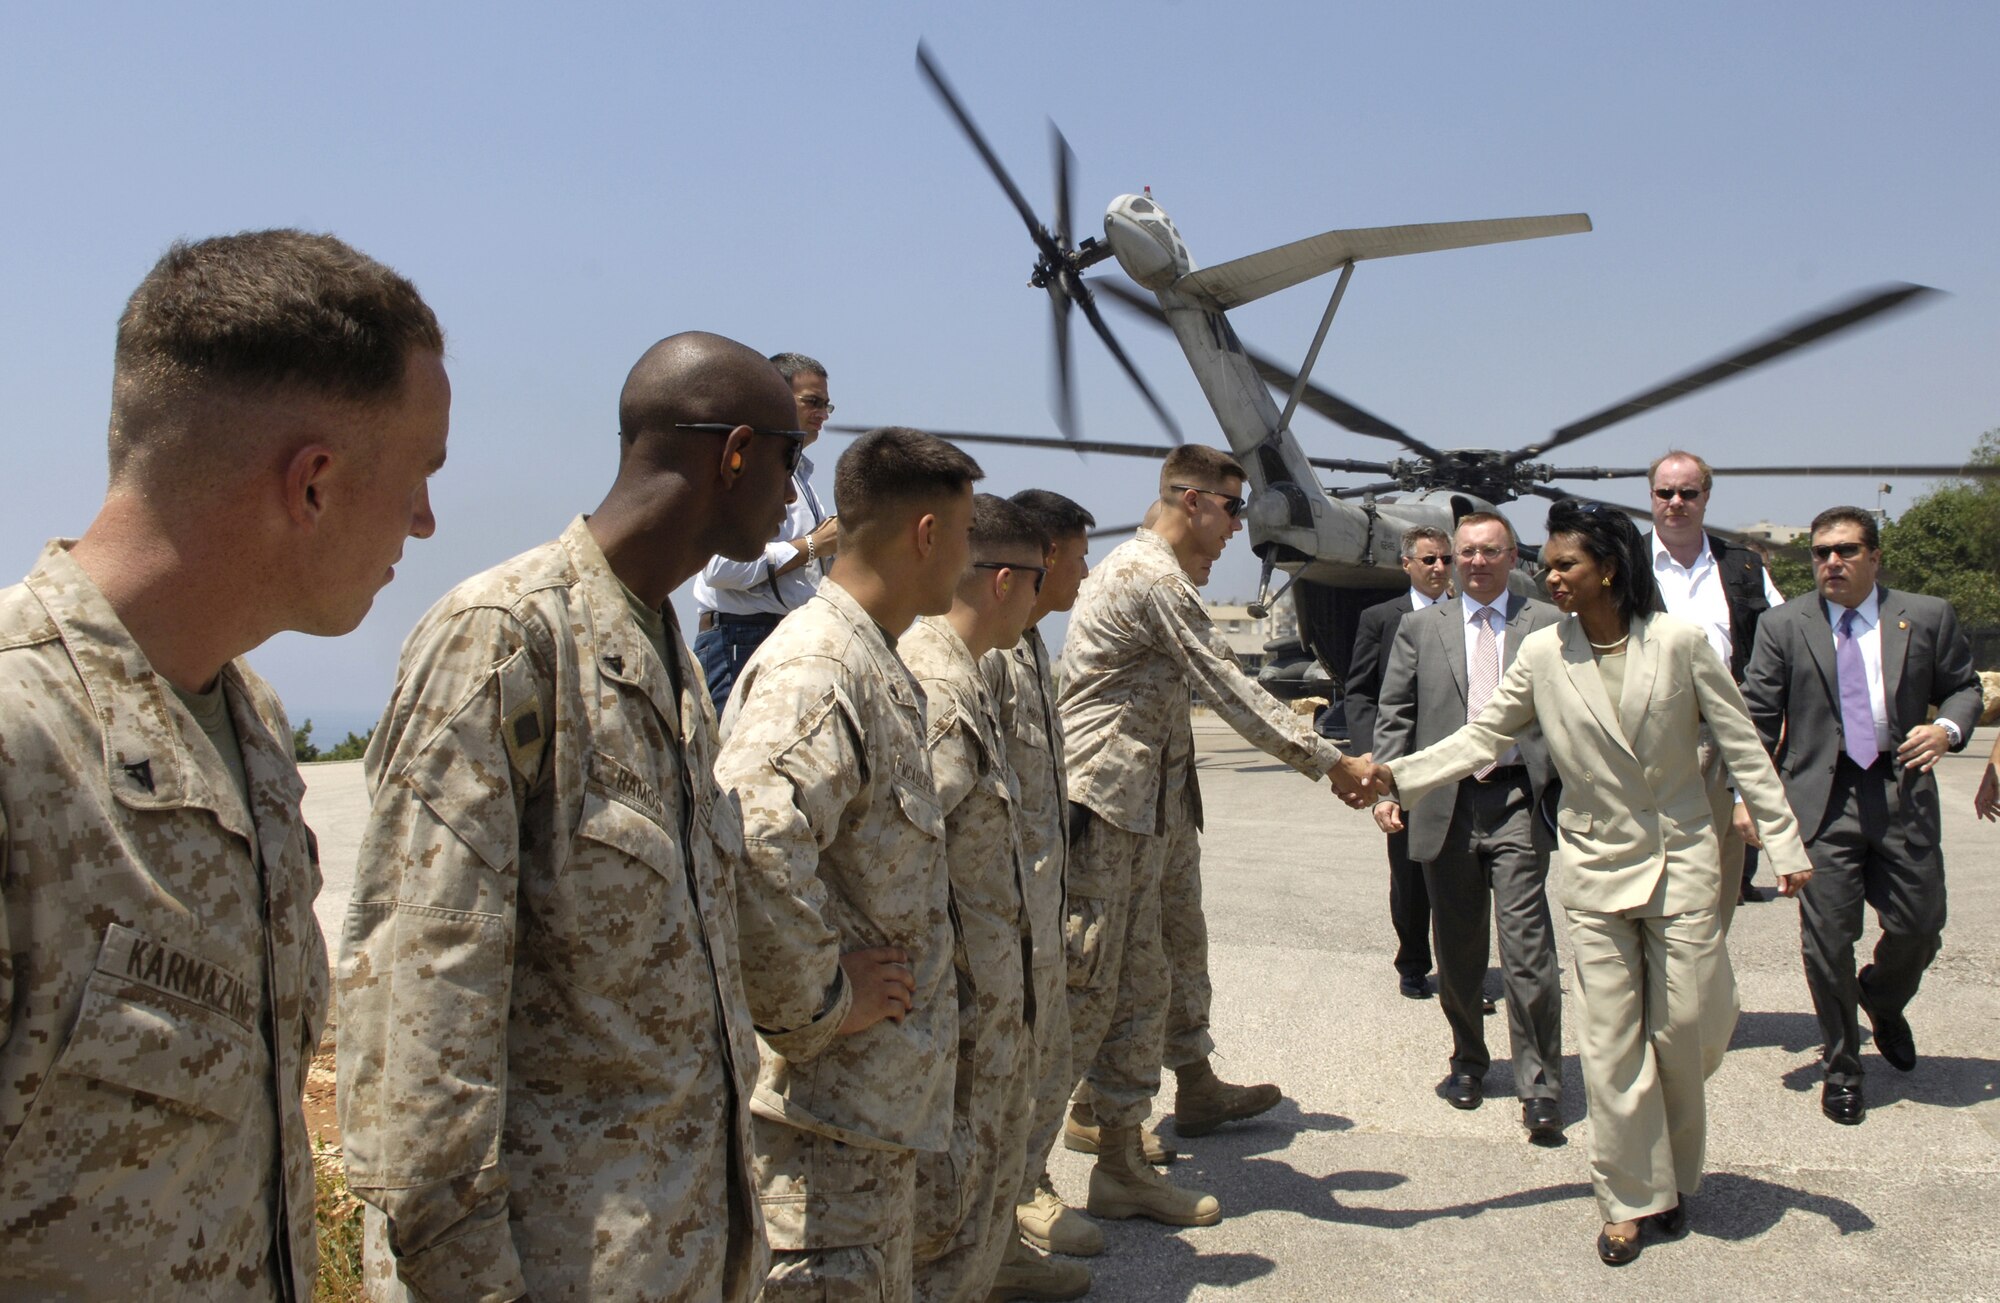 Secretary of State Condoleezza Rice greets Marines upon arrival at the U.S. Embassy in Beirut, Lebanon, July 24.  Secretary Rice flew in from Cyprus on a Marine CH-53 Sea Stallion helicopter escorted by an Air Force MH-53M Pave Low helicopter from the 352nd Special Operations Group at Royal Air Force Mildenhall.   (U.S. Air Force photo/Senior Airman Brian Ferguson)

